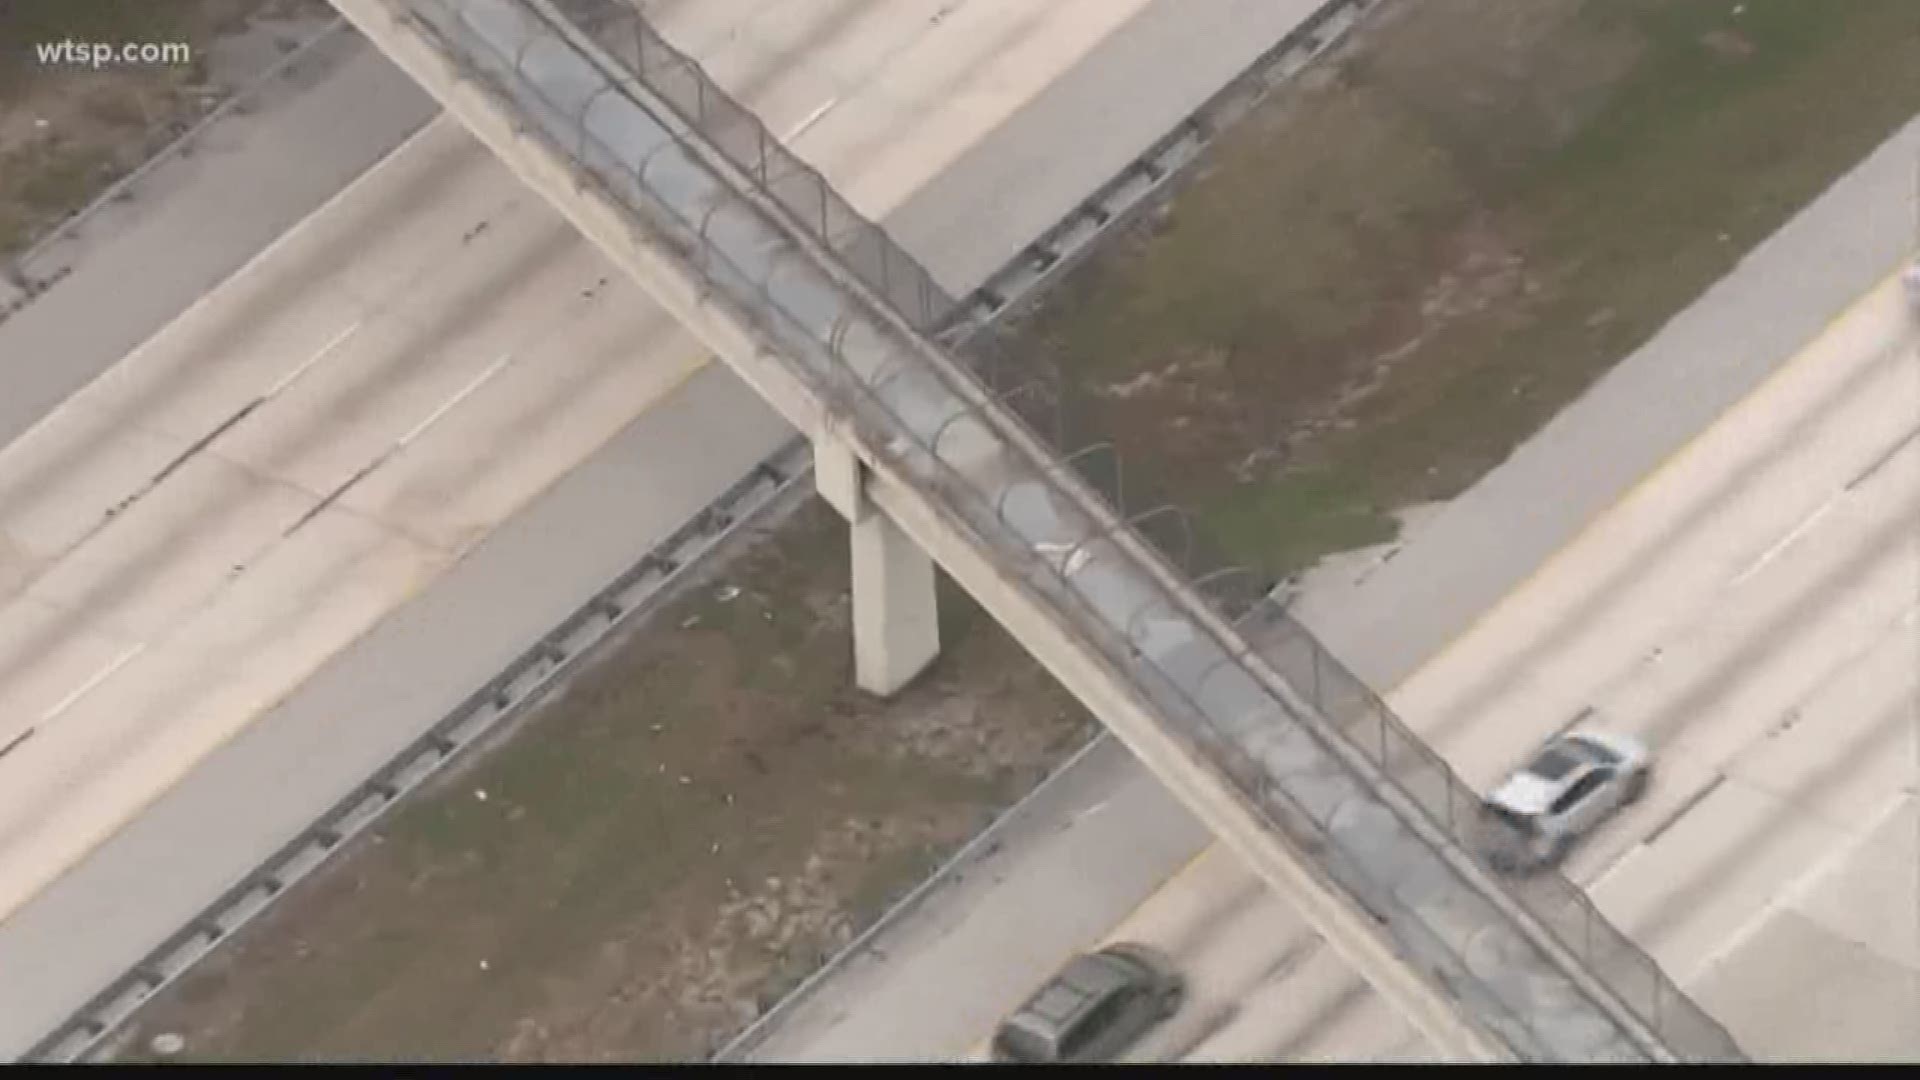 Police say the man was armed with a knife and moved toward officers on an I-275 pedestrian overpass